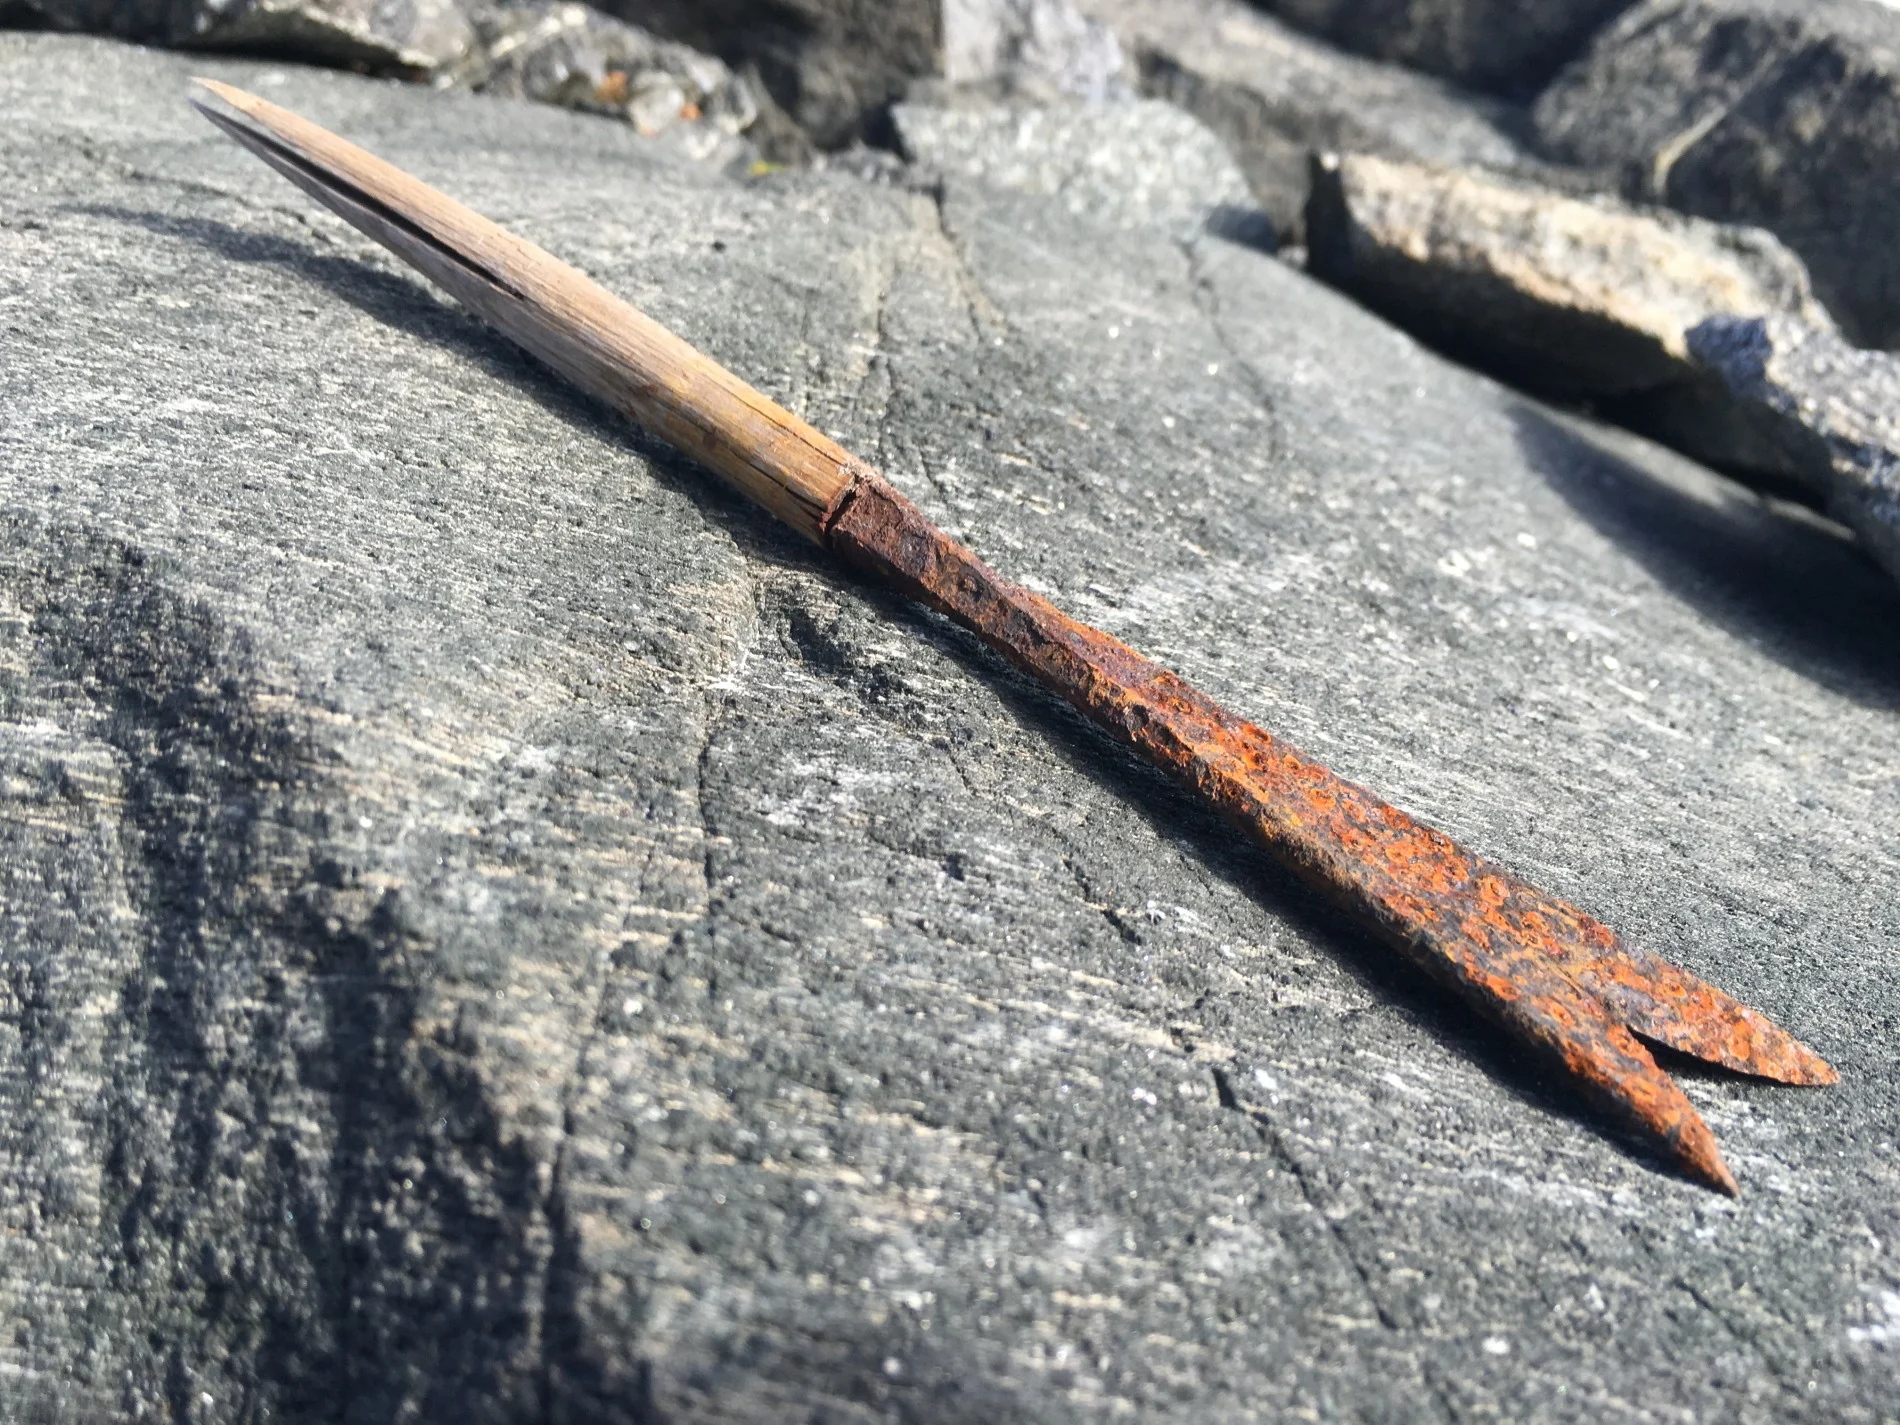 6,000-year-old hunting arrows revealed by melting ice in Norway